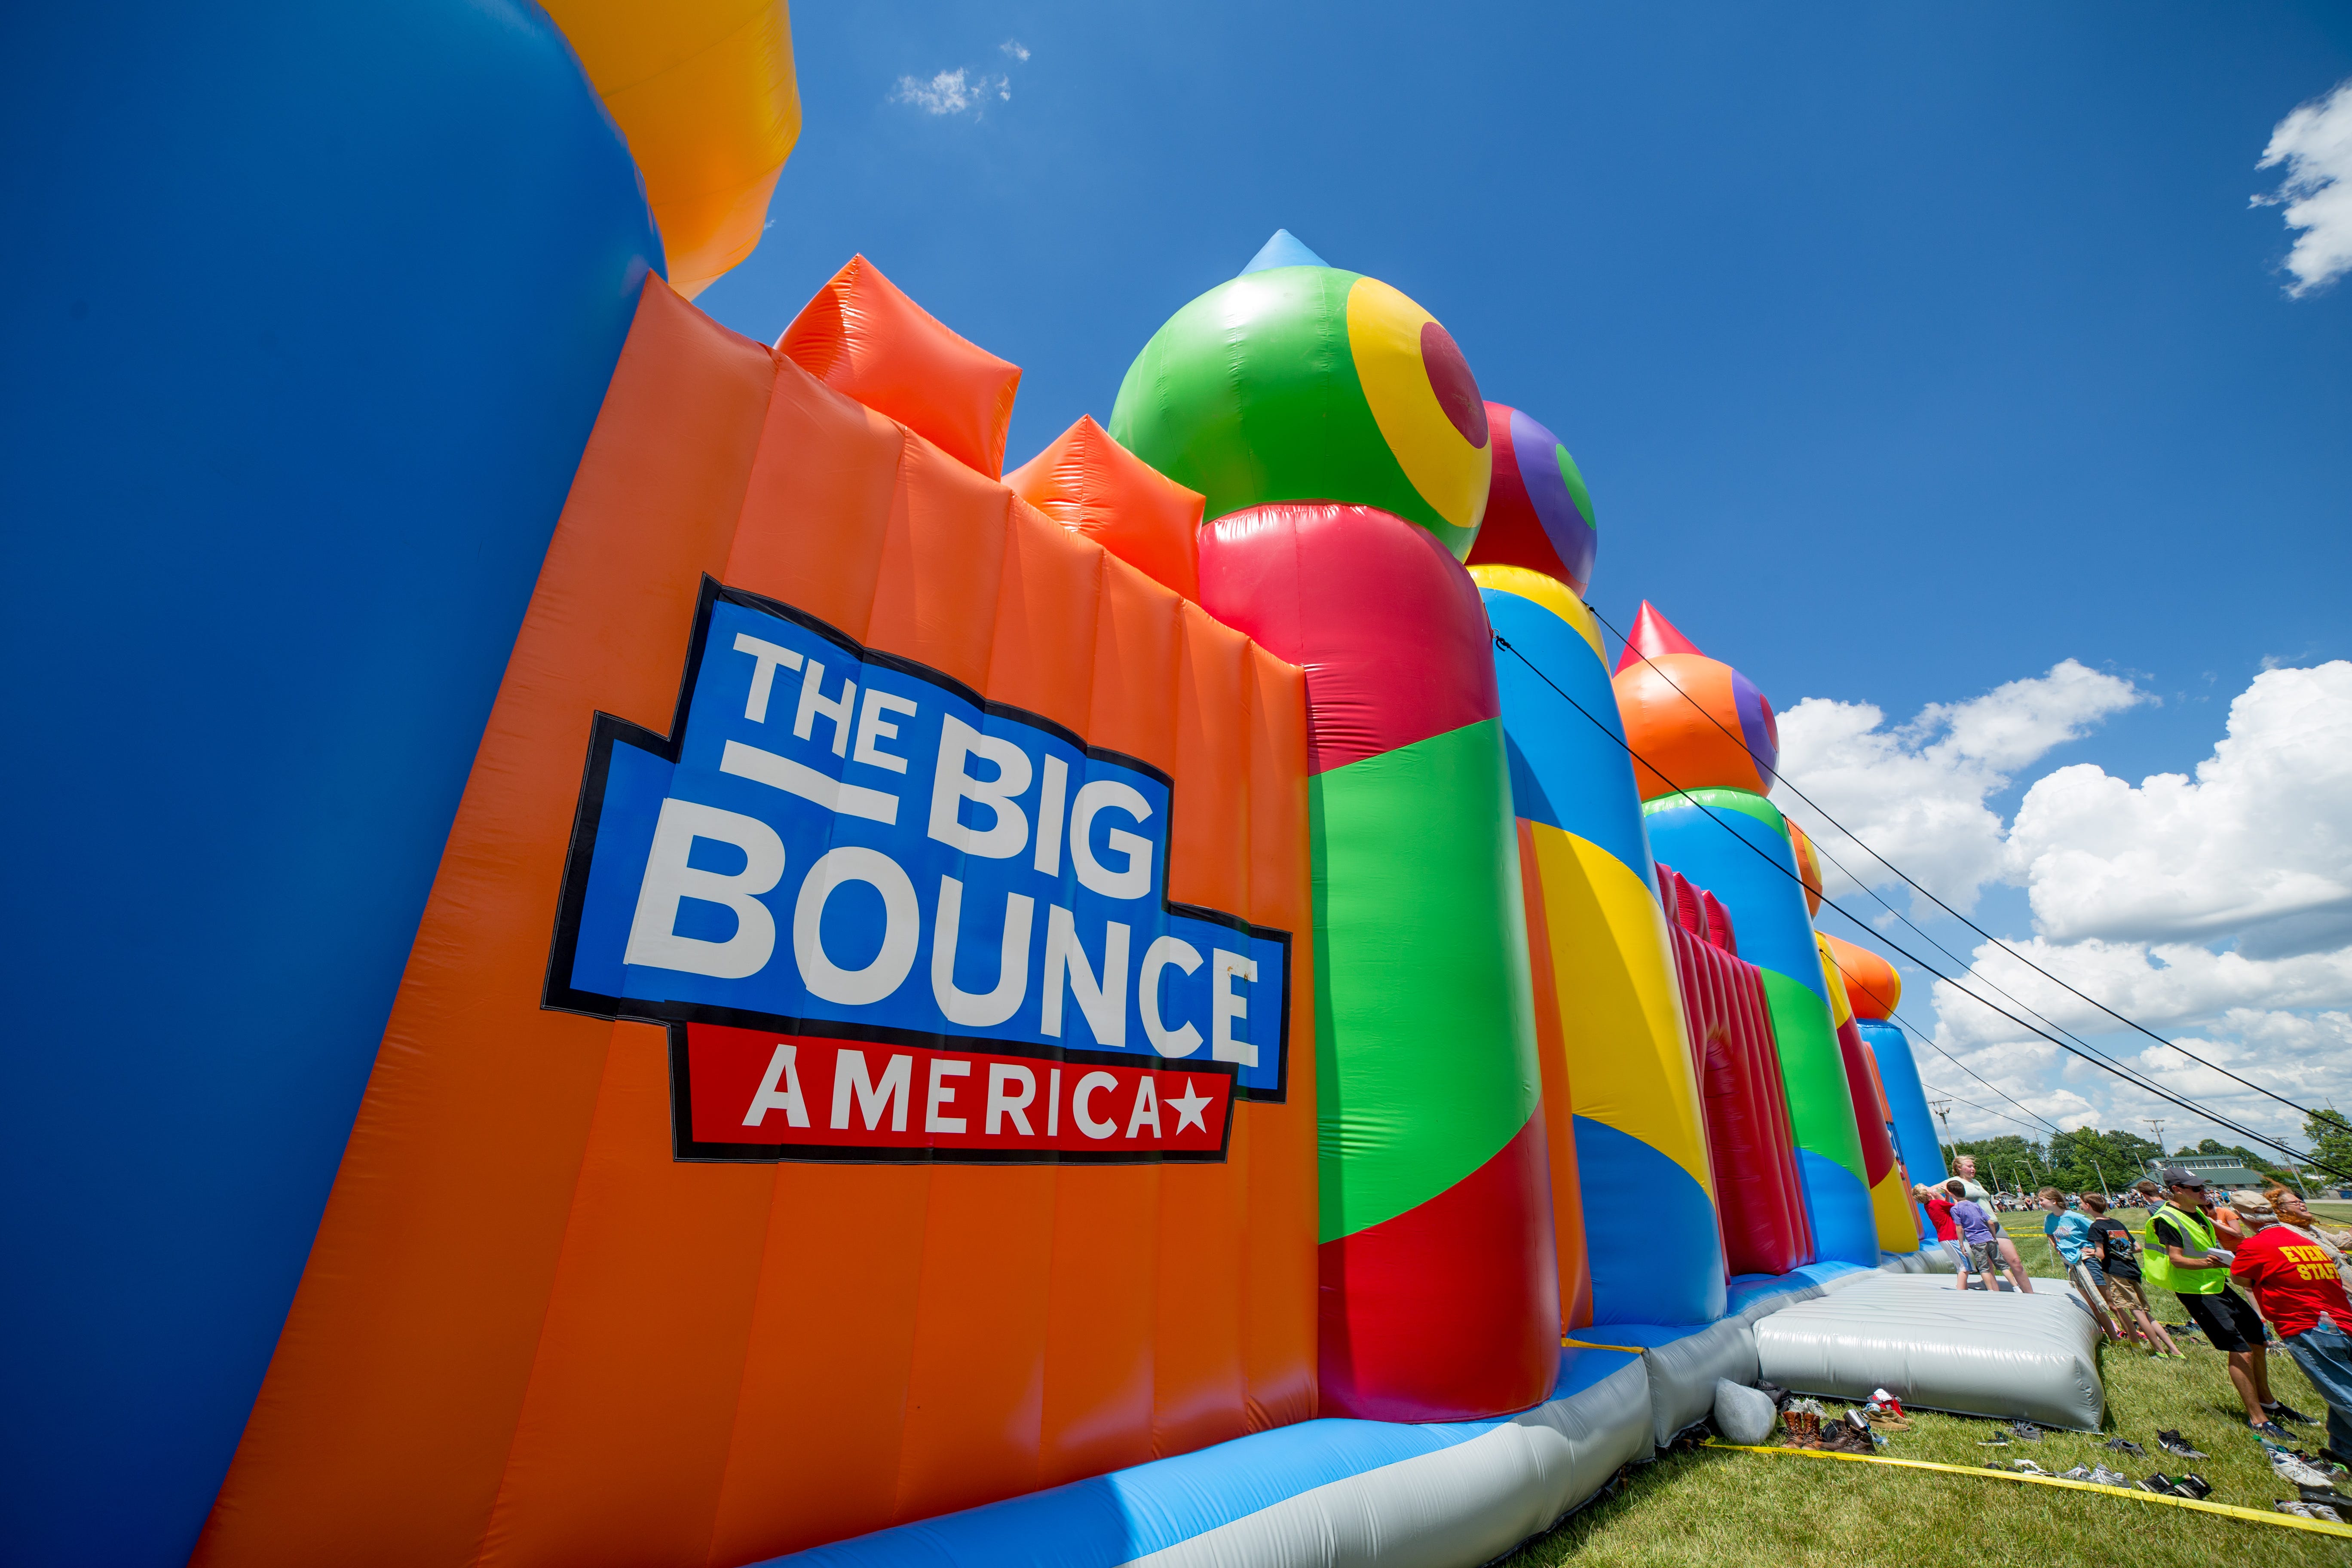 Giant bounce house hops into El Paso this weekend